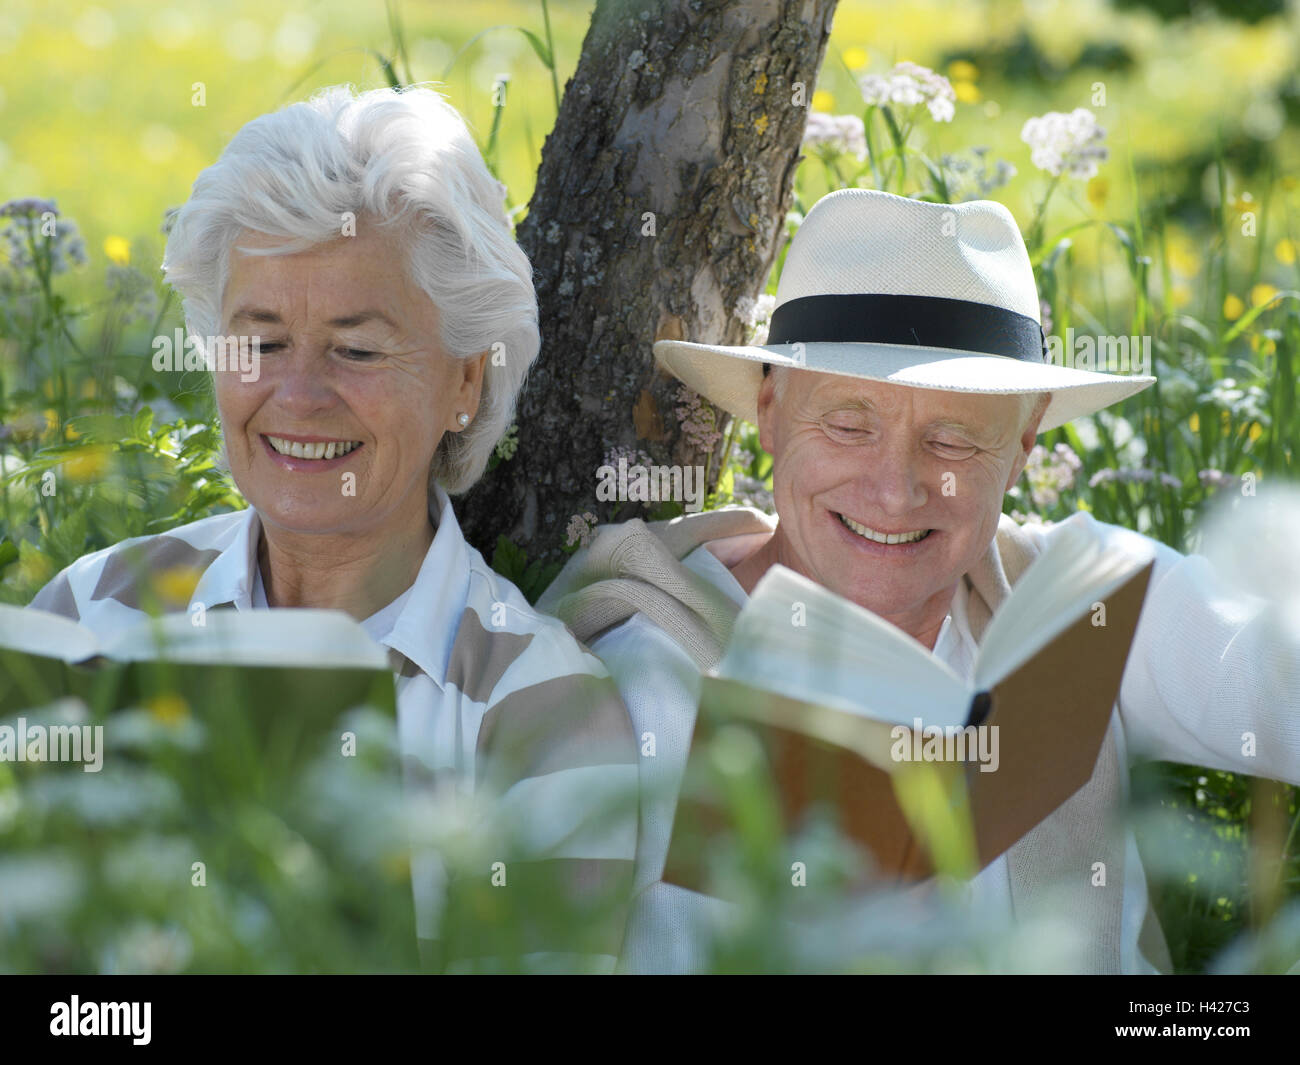 Garden, meadow, tree, senior citizen's couple, read, portrait, summer, park, vacation, summer vacation, retirement, pension, leisure time, hobby, leisure activity, pastime, détente, rest, enjoy, sit, lean together, side by side, aneinanderlehnen, trunk, Best of all Age, old person, couple, senior citizens, happily, happily, amuses, contently, agile, actively, young remaining, headgear, care, partnership, affection, love, suture, luck, comlex, cohesion, common characteristic, interests together, togetherness, togetherness, tuning positively, joy of life, satisfaction, attitude to life, Stock Photo